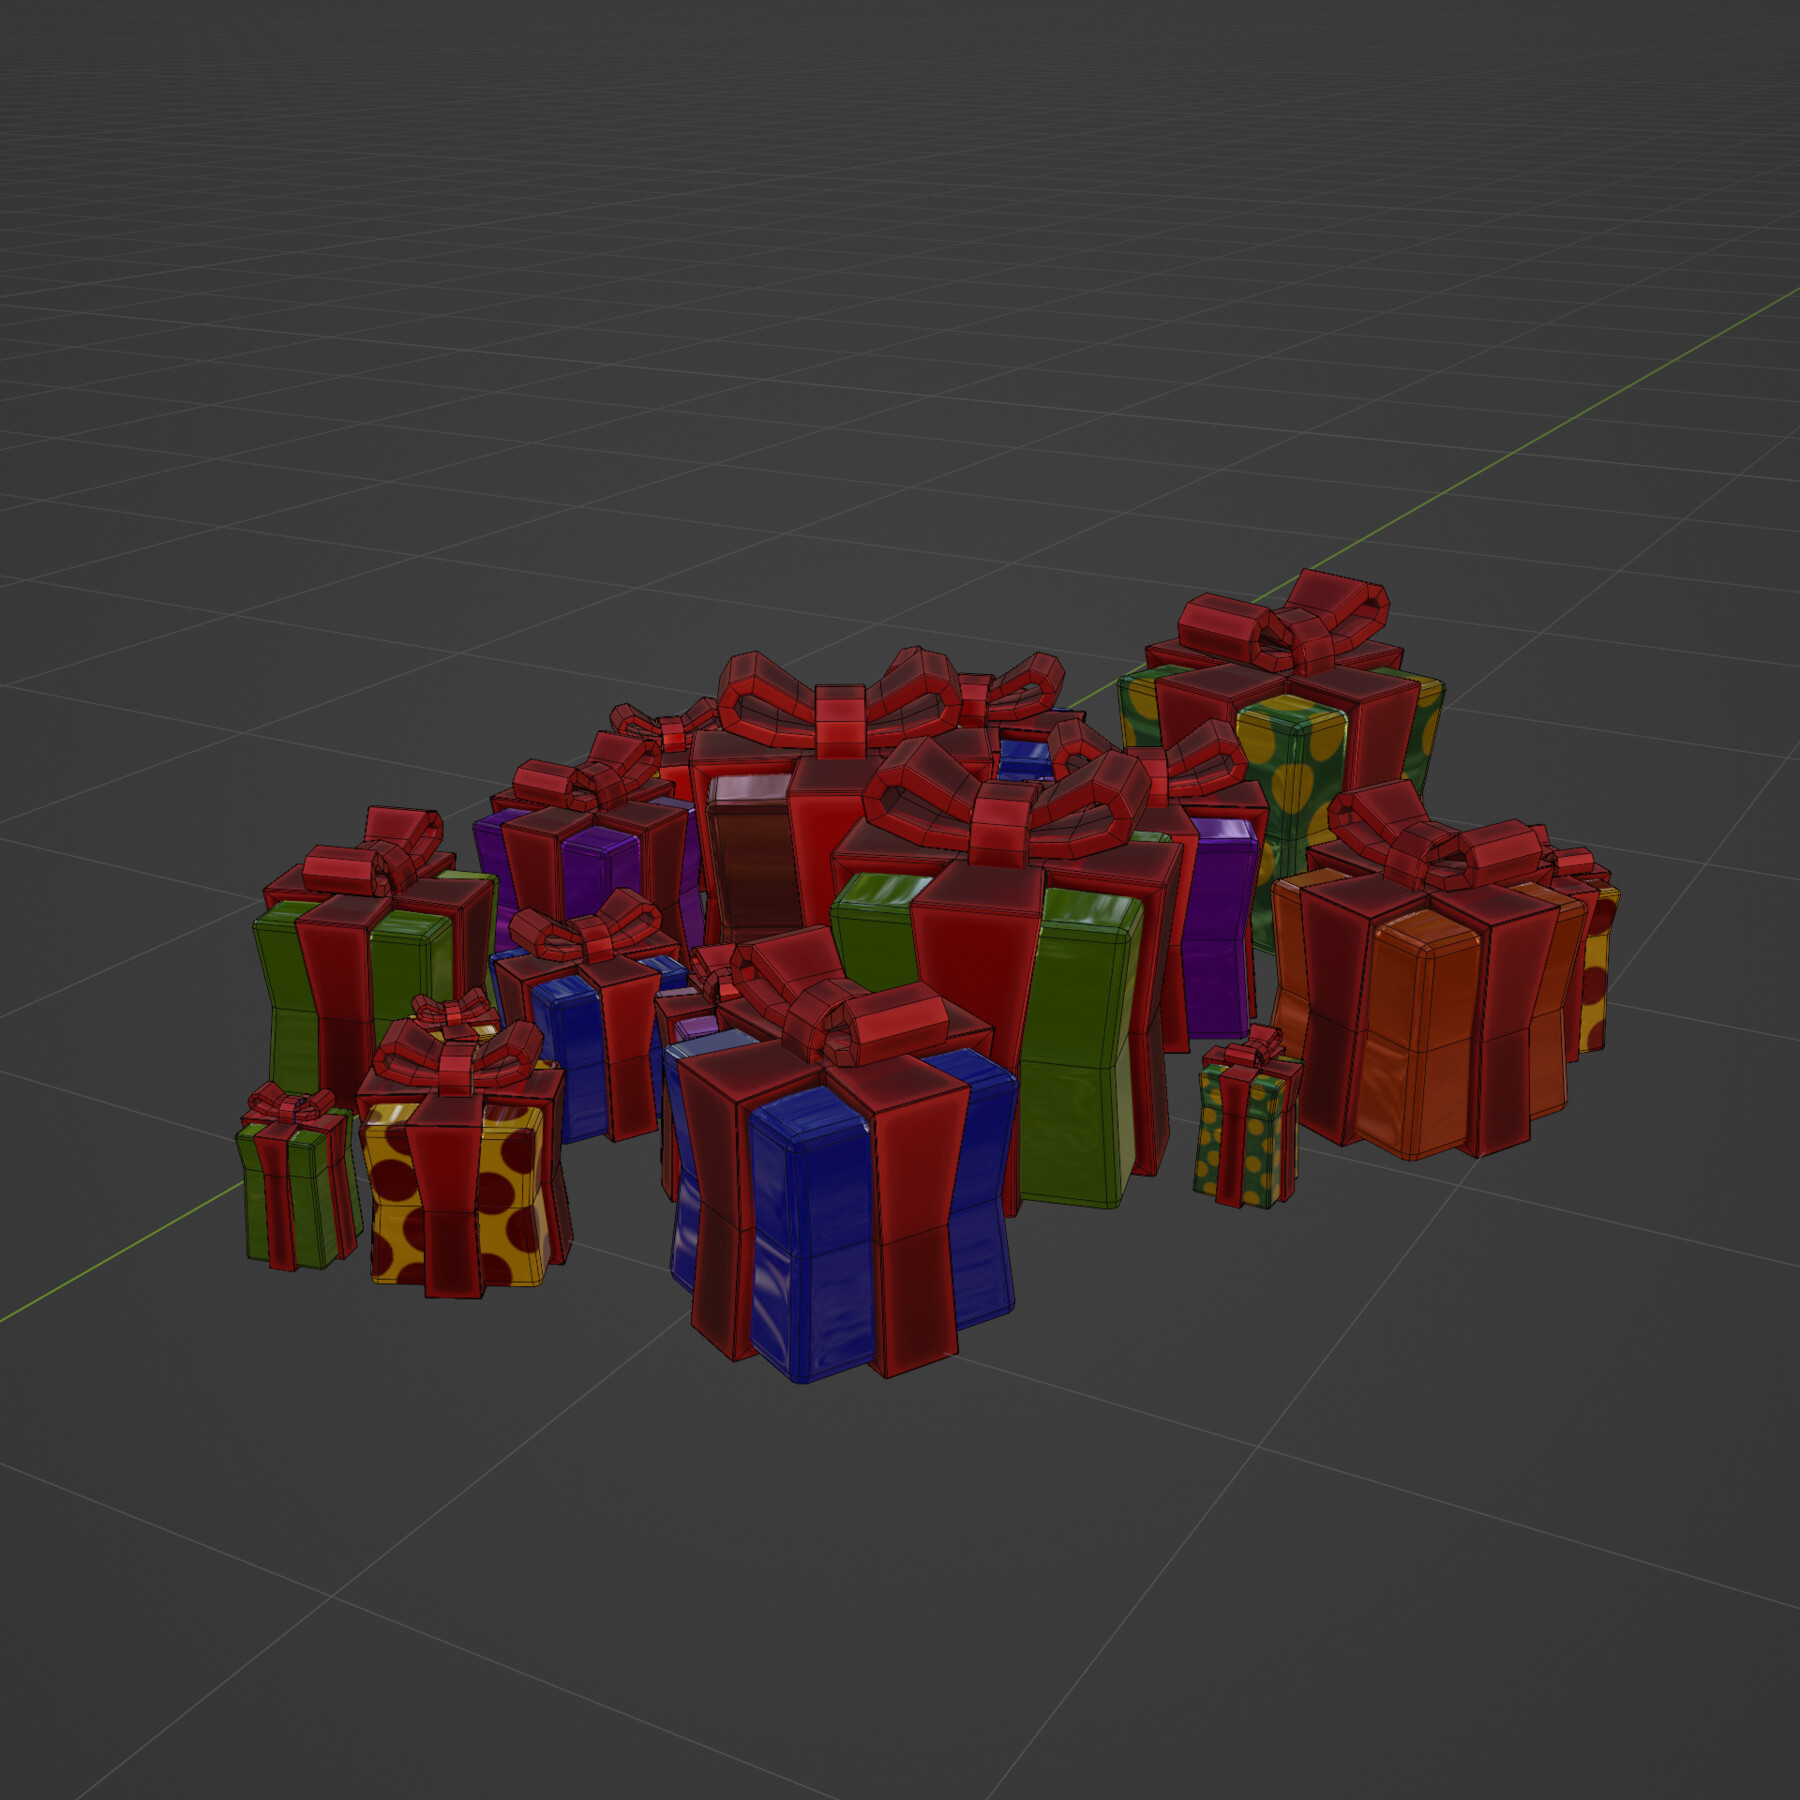 ArtStation - Stylized Christmas Gift Boxes | Game Assets